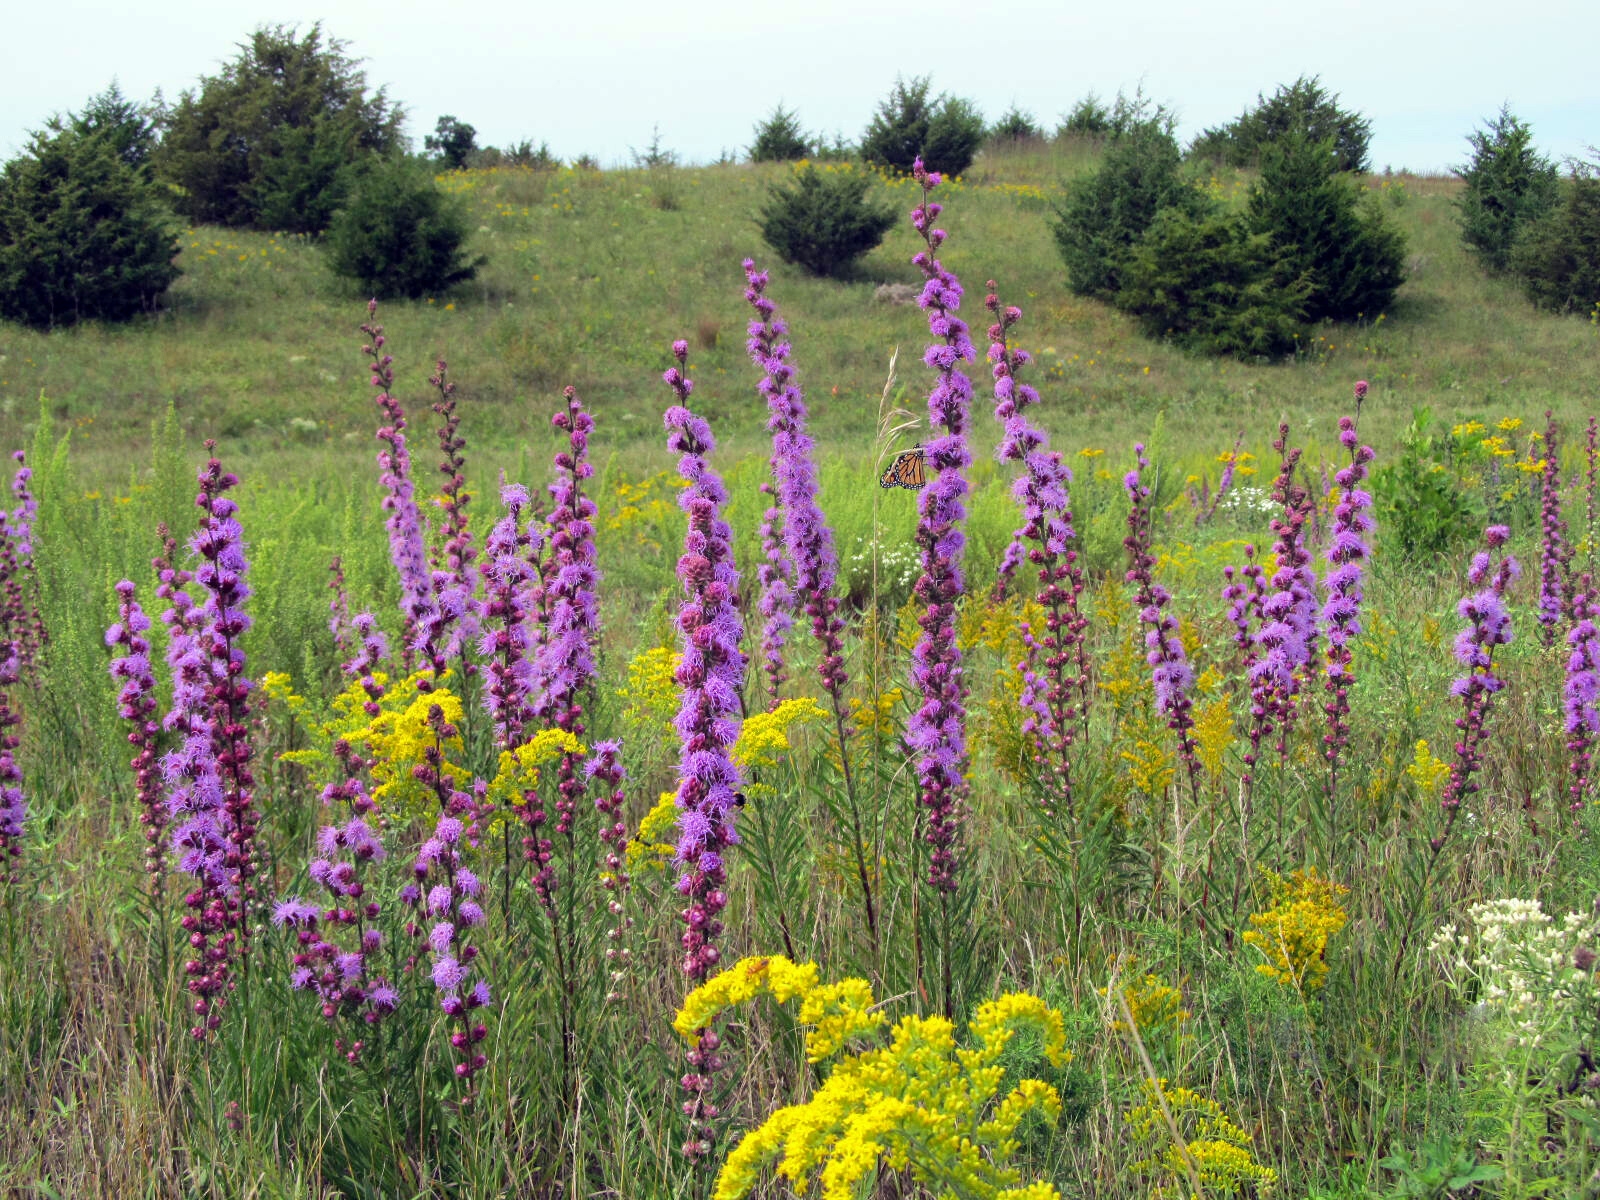 Liatris and goldenrod at Hastings Sand Coulee SNA